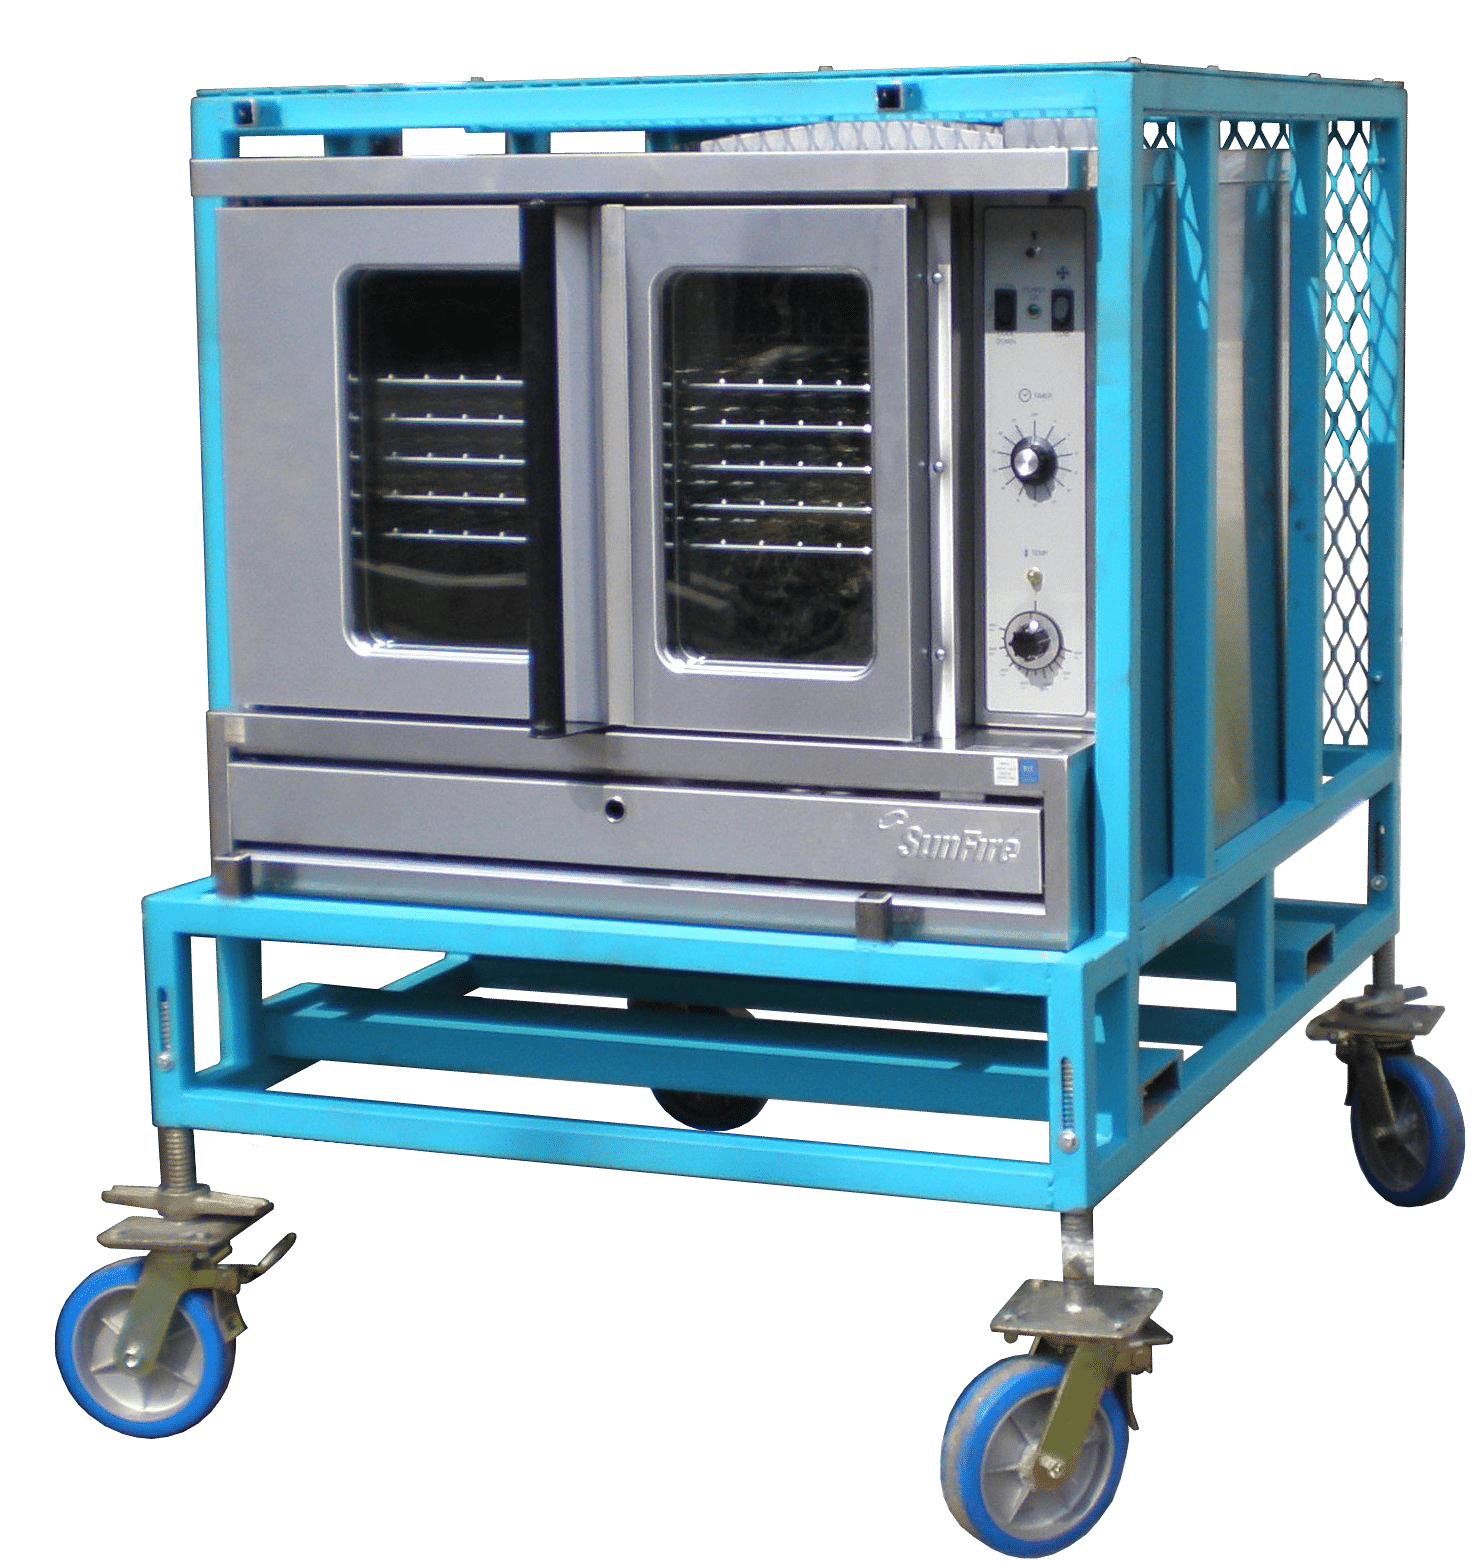 0449-open-convection-oven